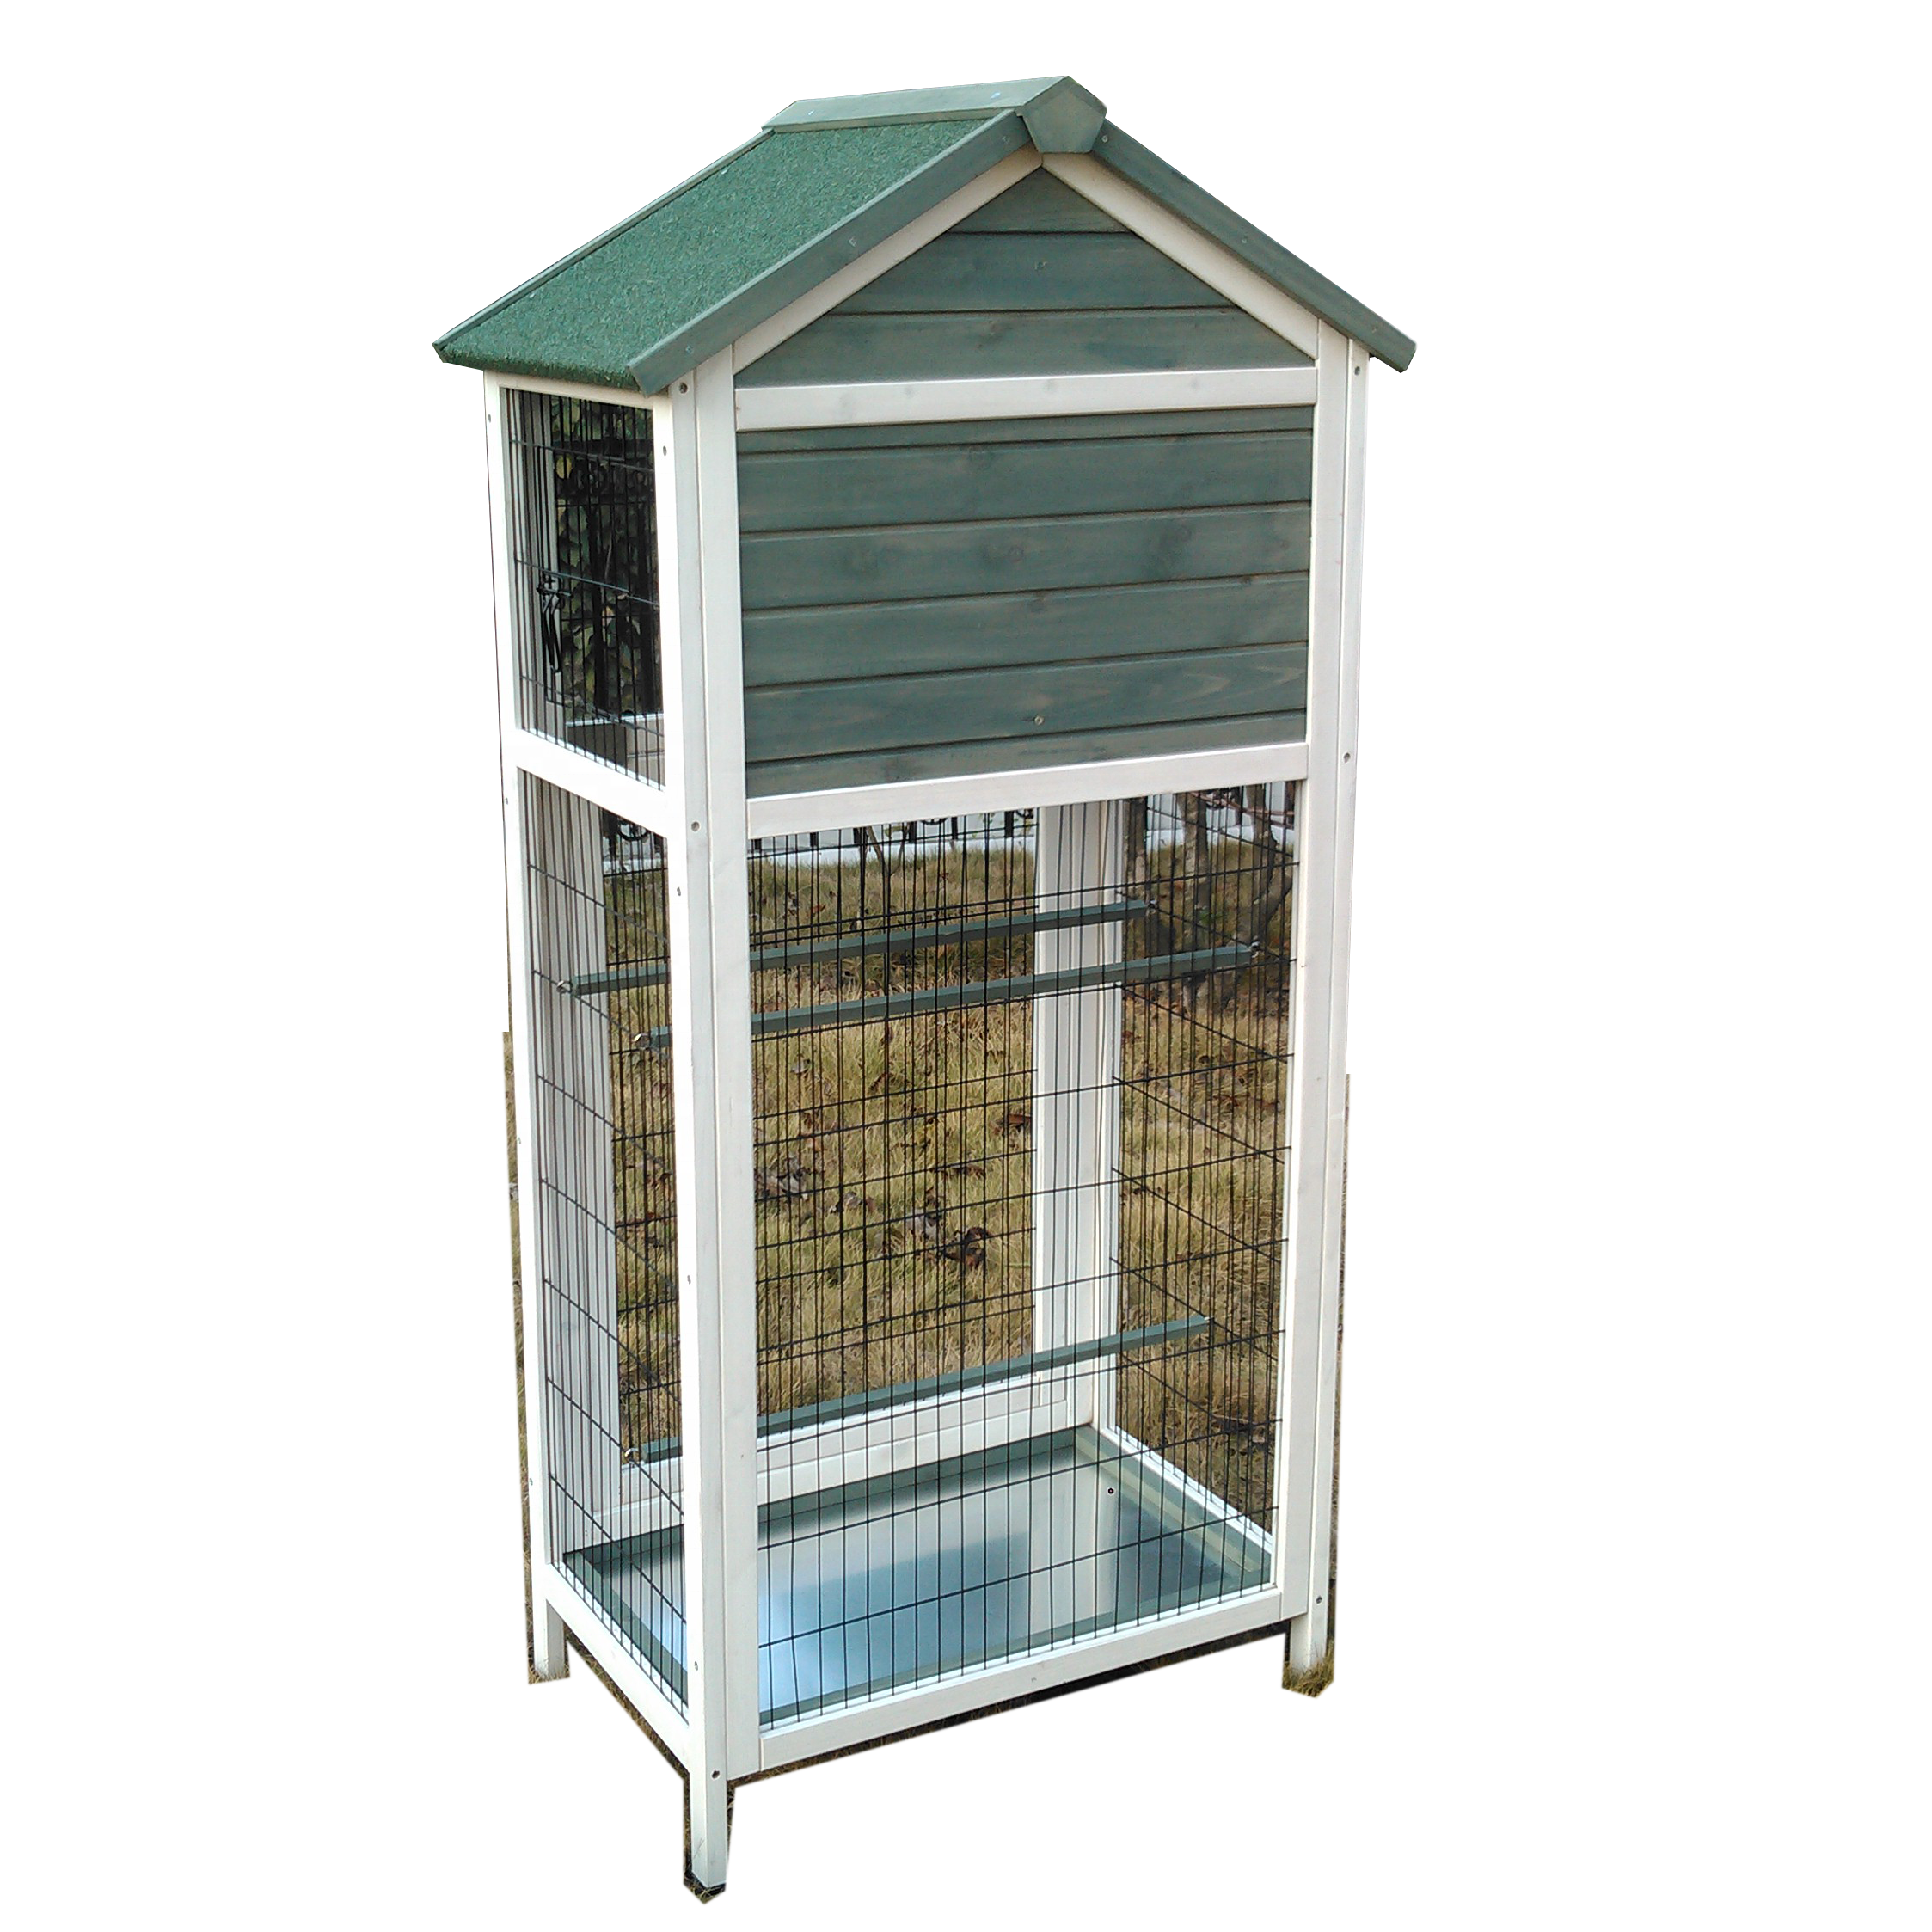 wholesale Hot Sale Aviary Standing Vertical Play House with Bars Parakeets Finch Easy clean Simple bird feeder cages handmade Featured Image